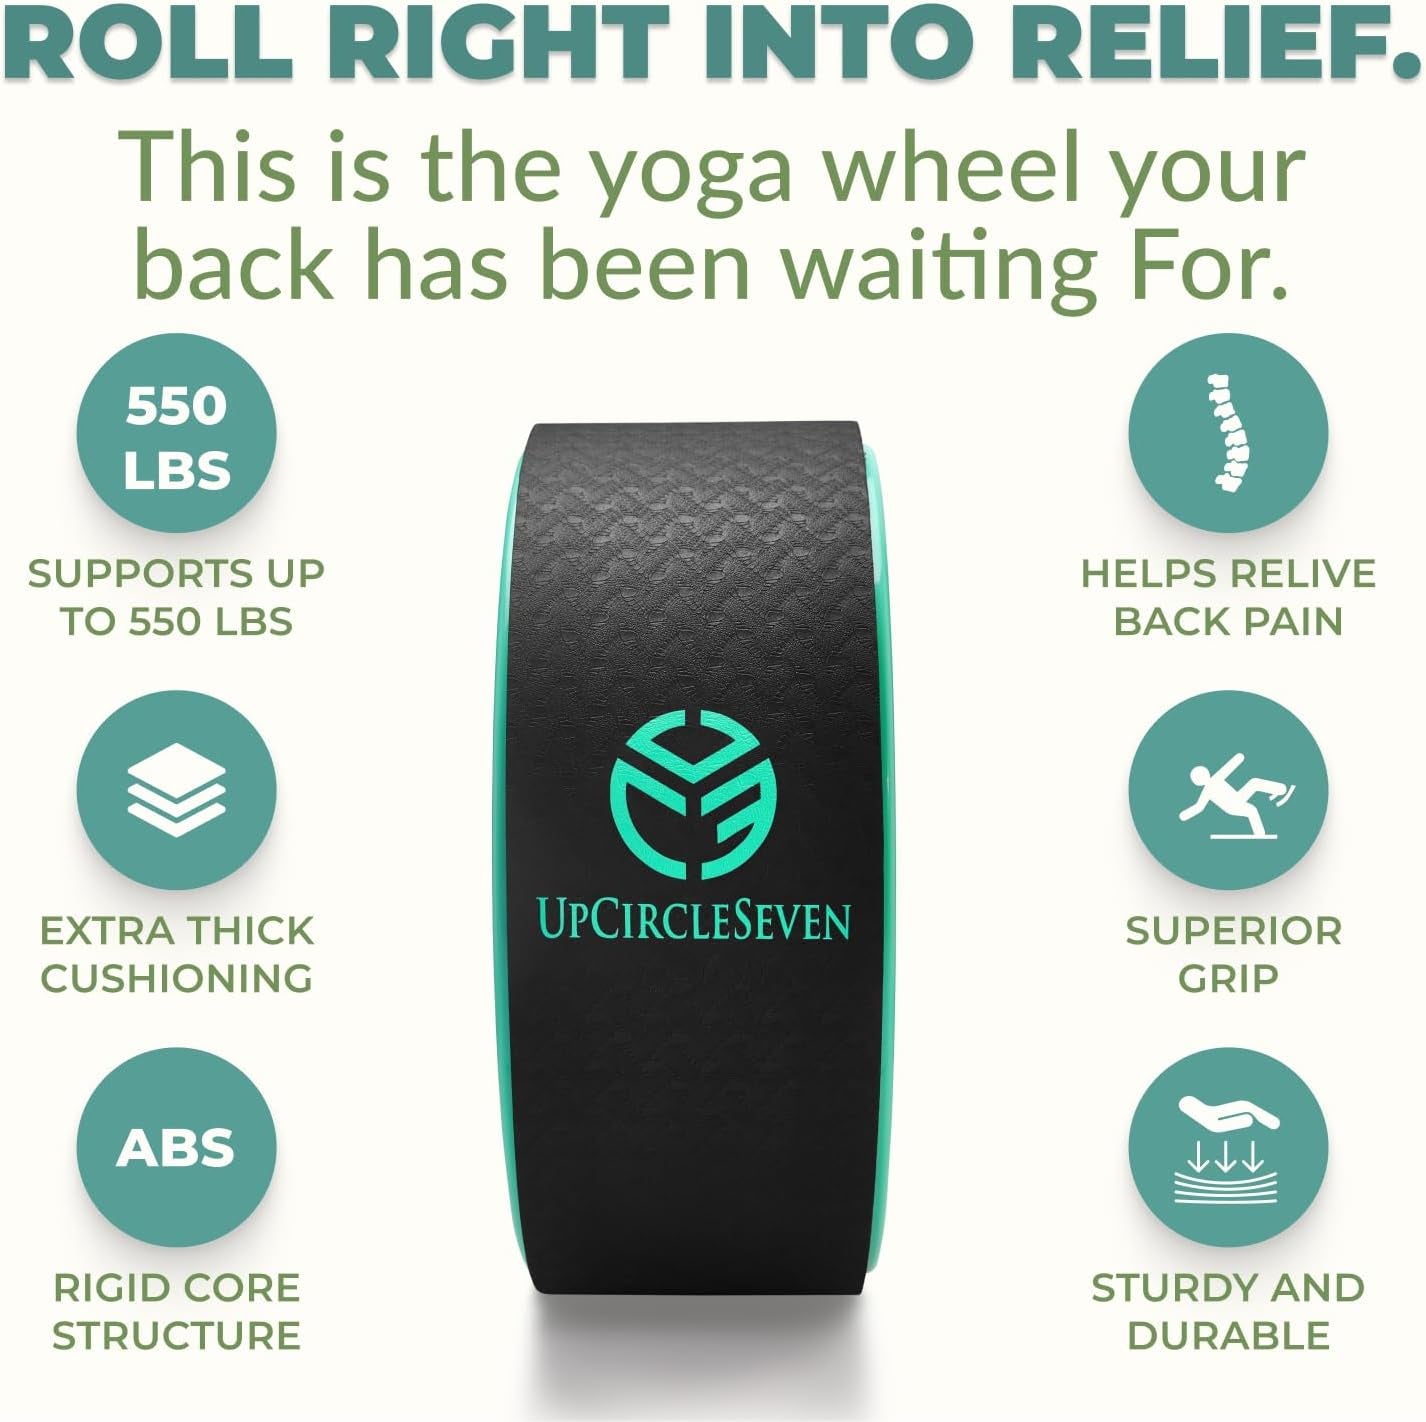 Back Roller & Yoga Wheel - Relieve Lower & Upper Back Pain & Stiffness - Therapeutically Stretch, Mobilize & Decompress Your Spine - Increase Mobility, Flexibility & Alignment